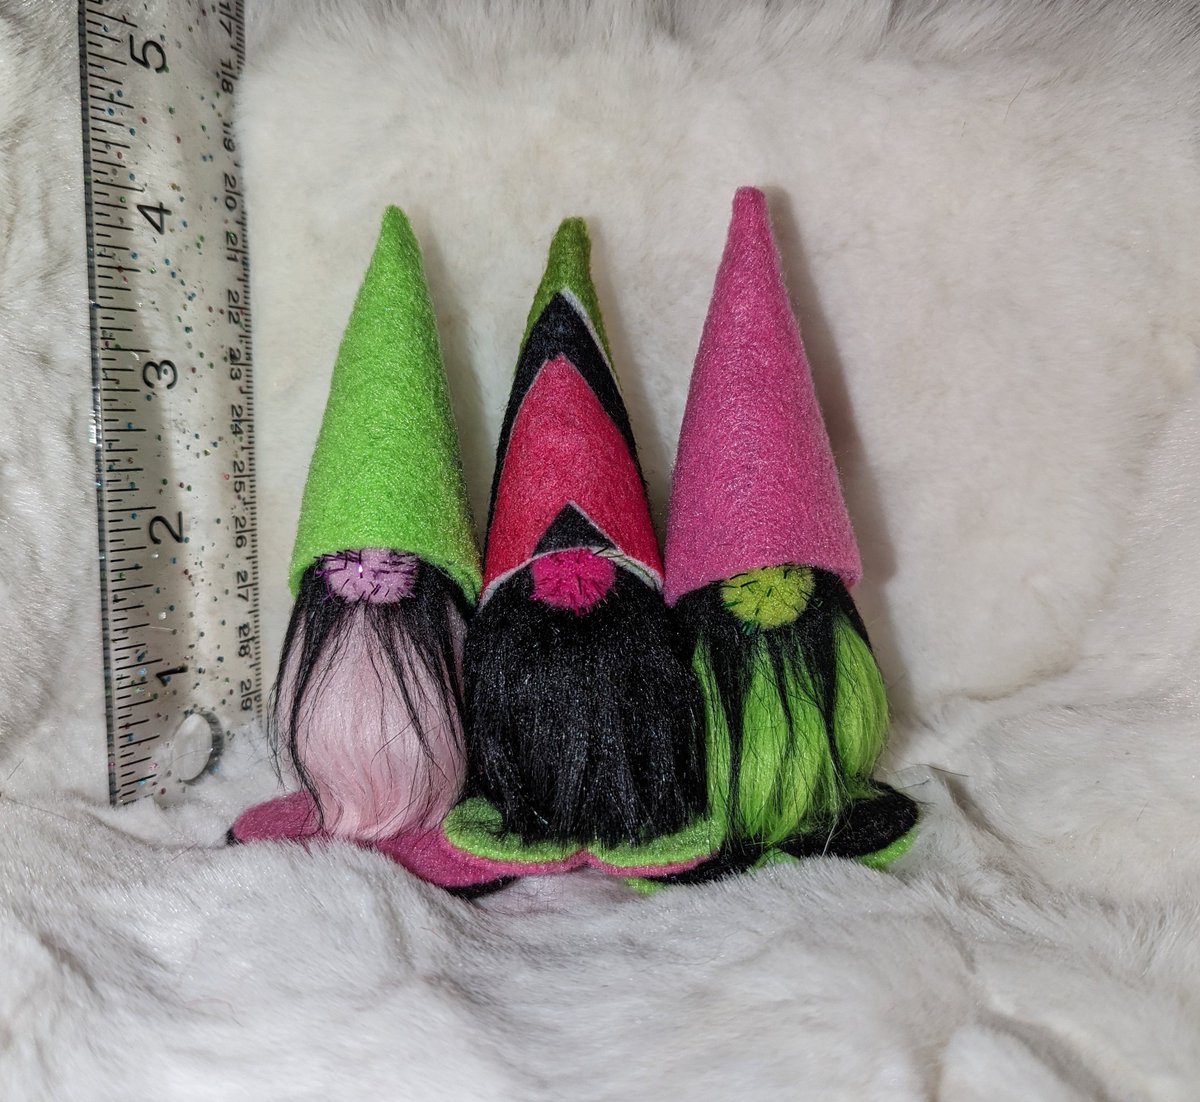 Pals we added a few Halloweeny Gnomester Trios to our website ☺️👻 🎃 including my favvorite~ da Candy Corn Trio! 😲🤭 mom might make more candy corns if people like em 🤓🤍🧡💛 there's a couple more too.. you can even design your own Trio colors if you want 😌🍄🐽🎩💚🧡💜